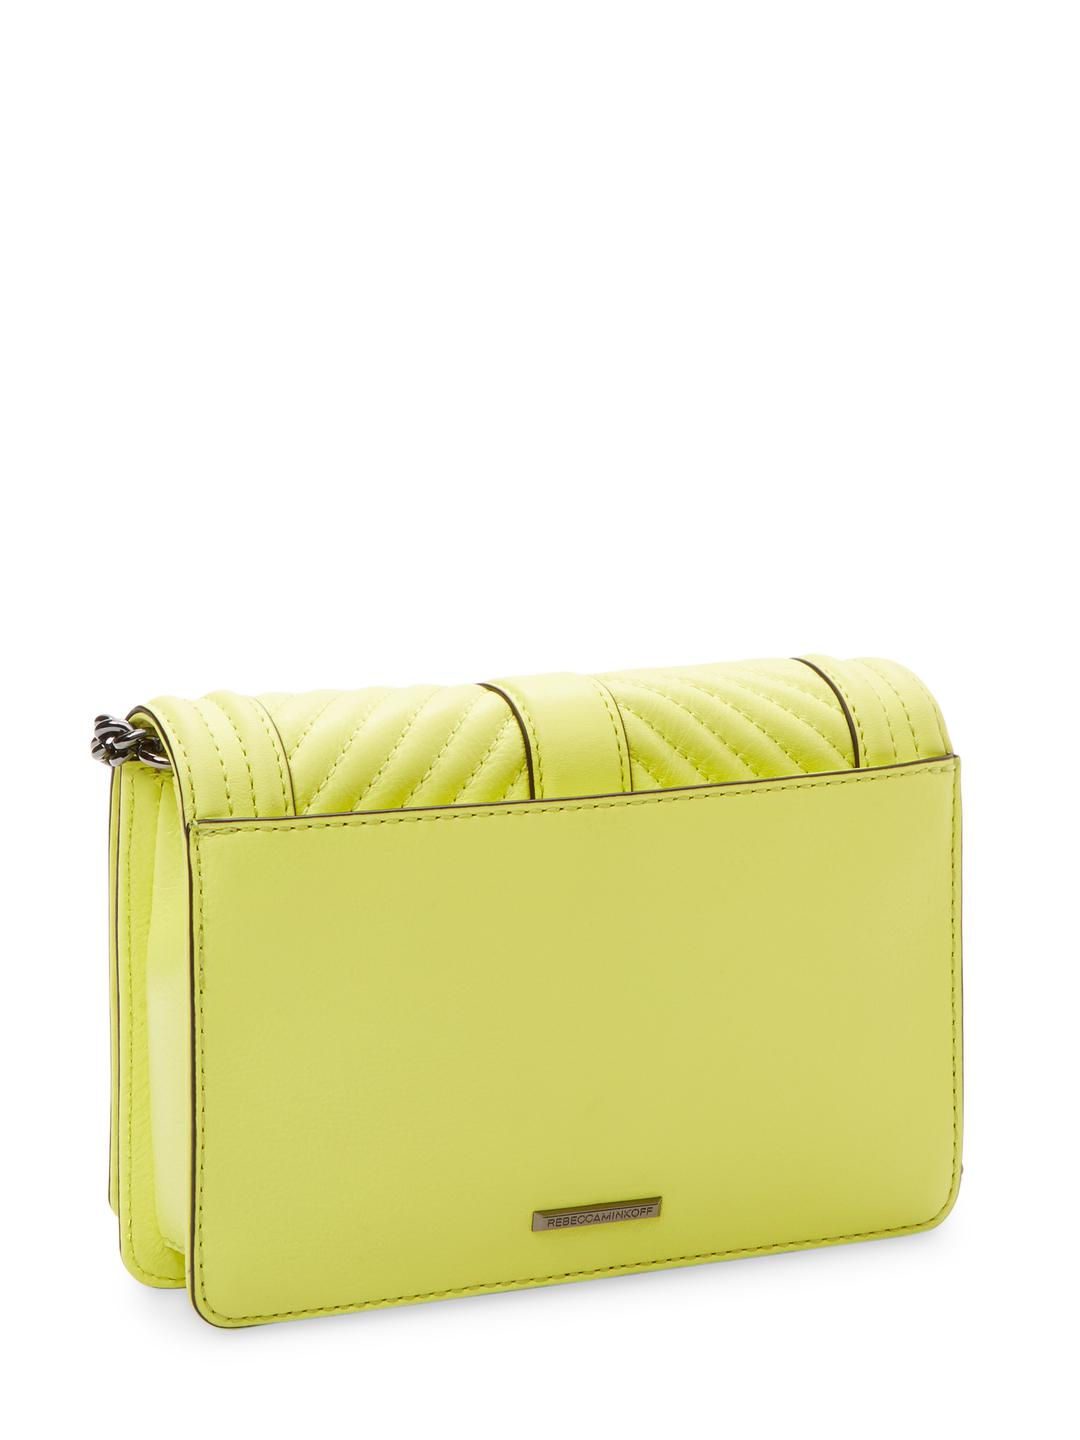 Rebecca Minkoff Leather Chevron Quilted Small Love Crossbody Bag in Neon  Yellow (Yellow) - Lyst